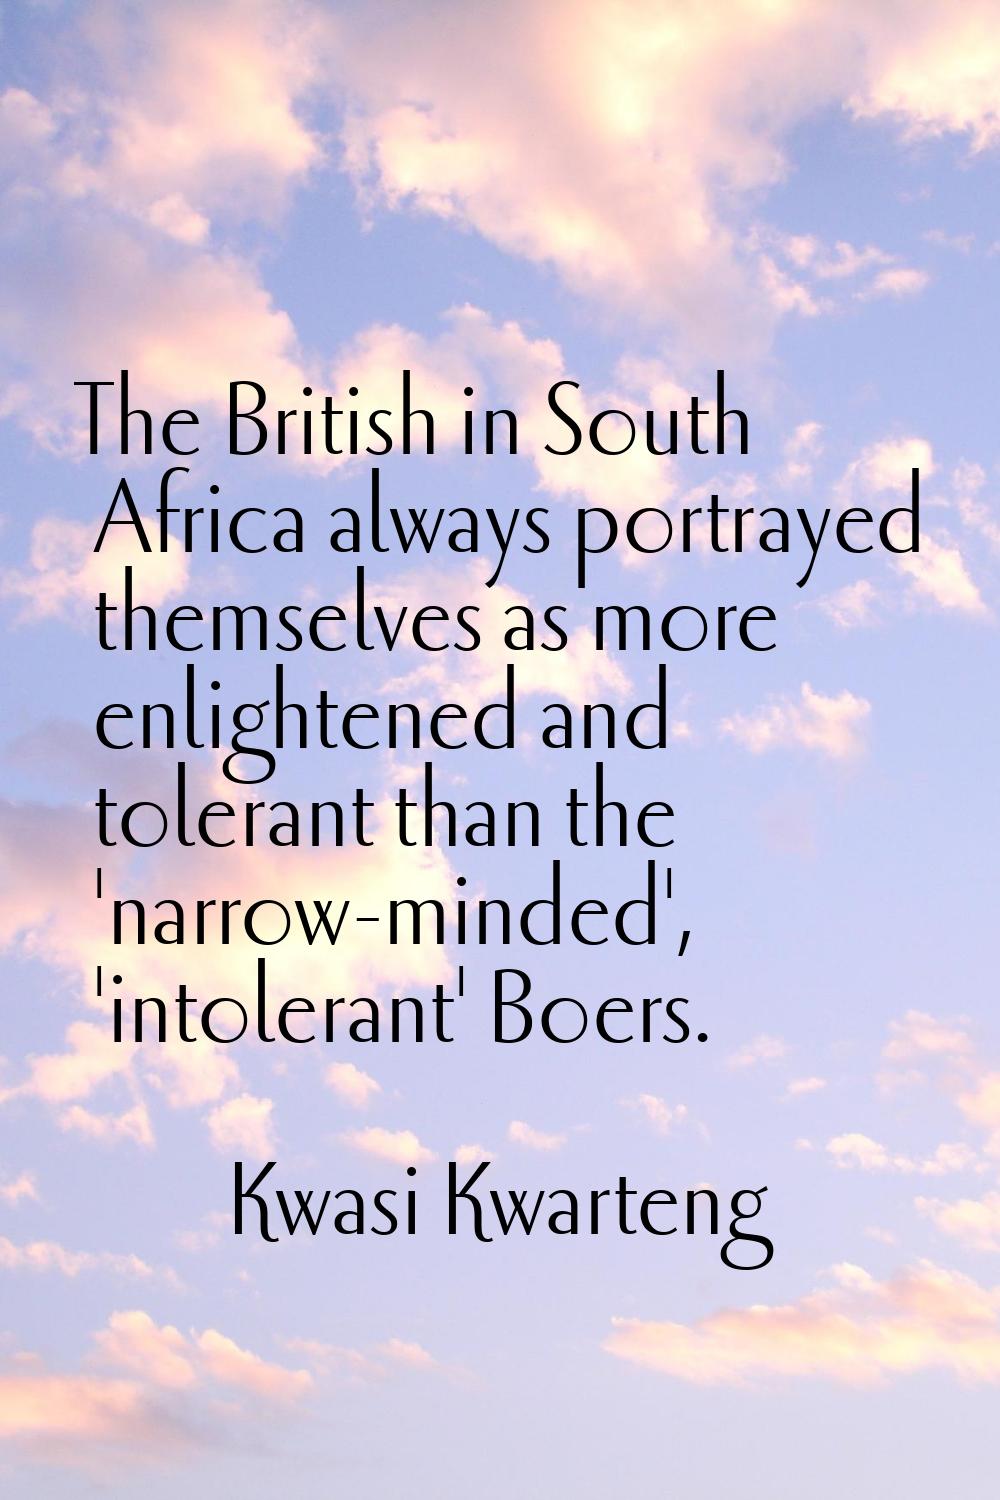 The British in South Africa always portrayed themselves as more enlightened and tolerant than the '